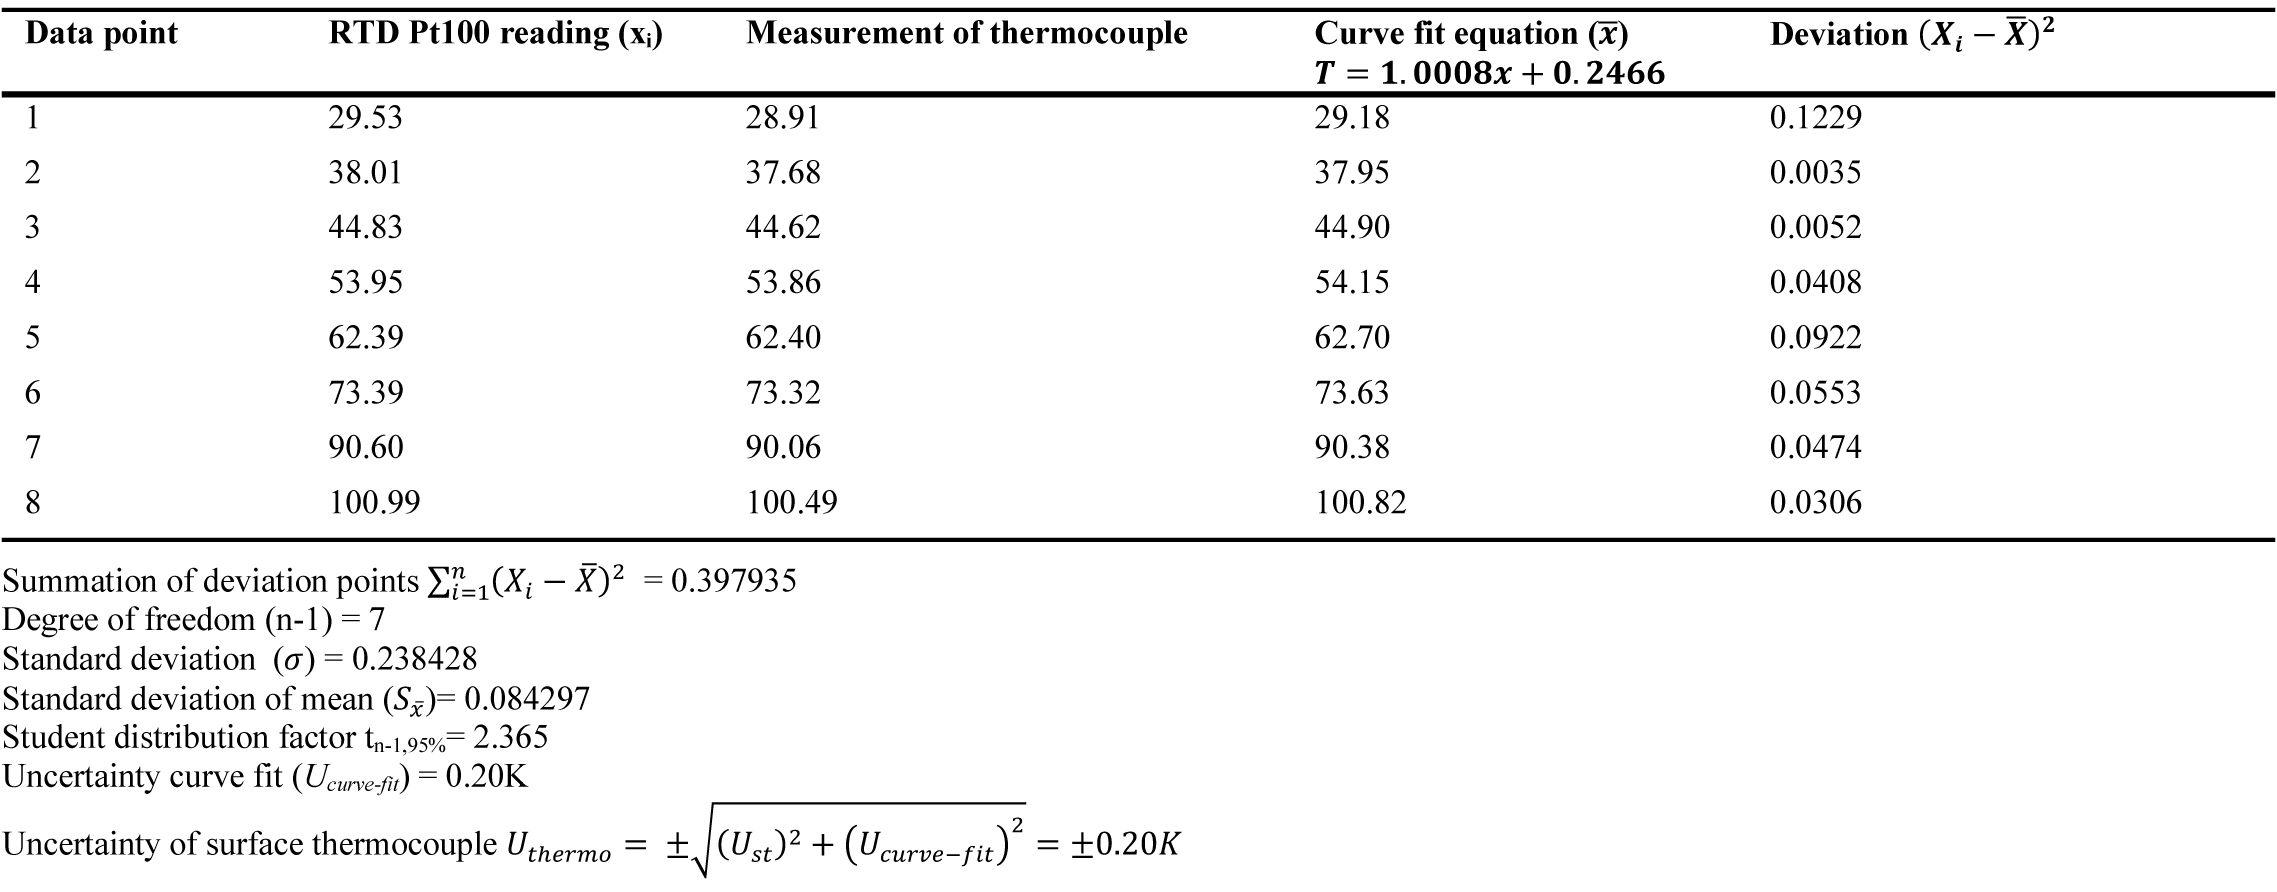 Surface thermocouple measurement uncertainty calculations.